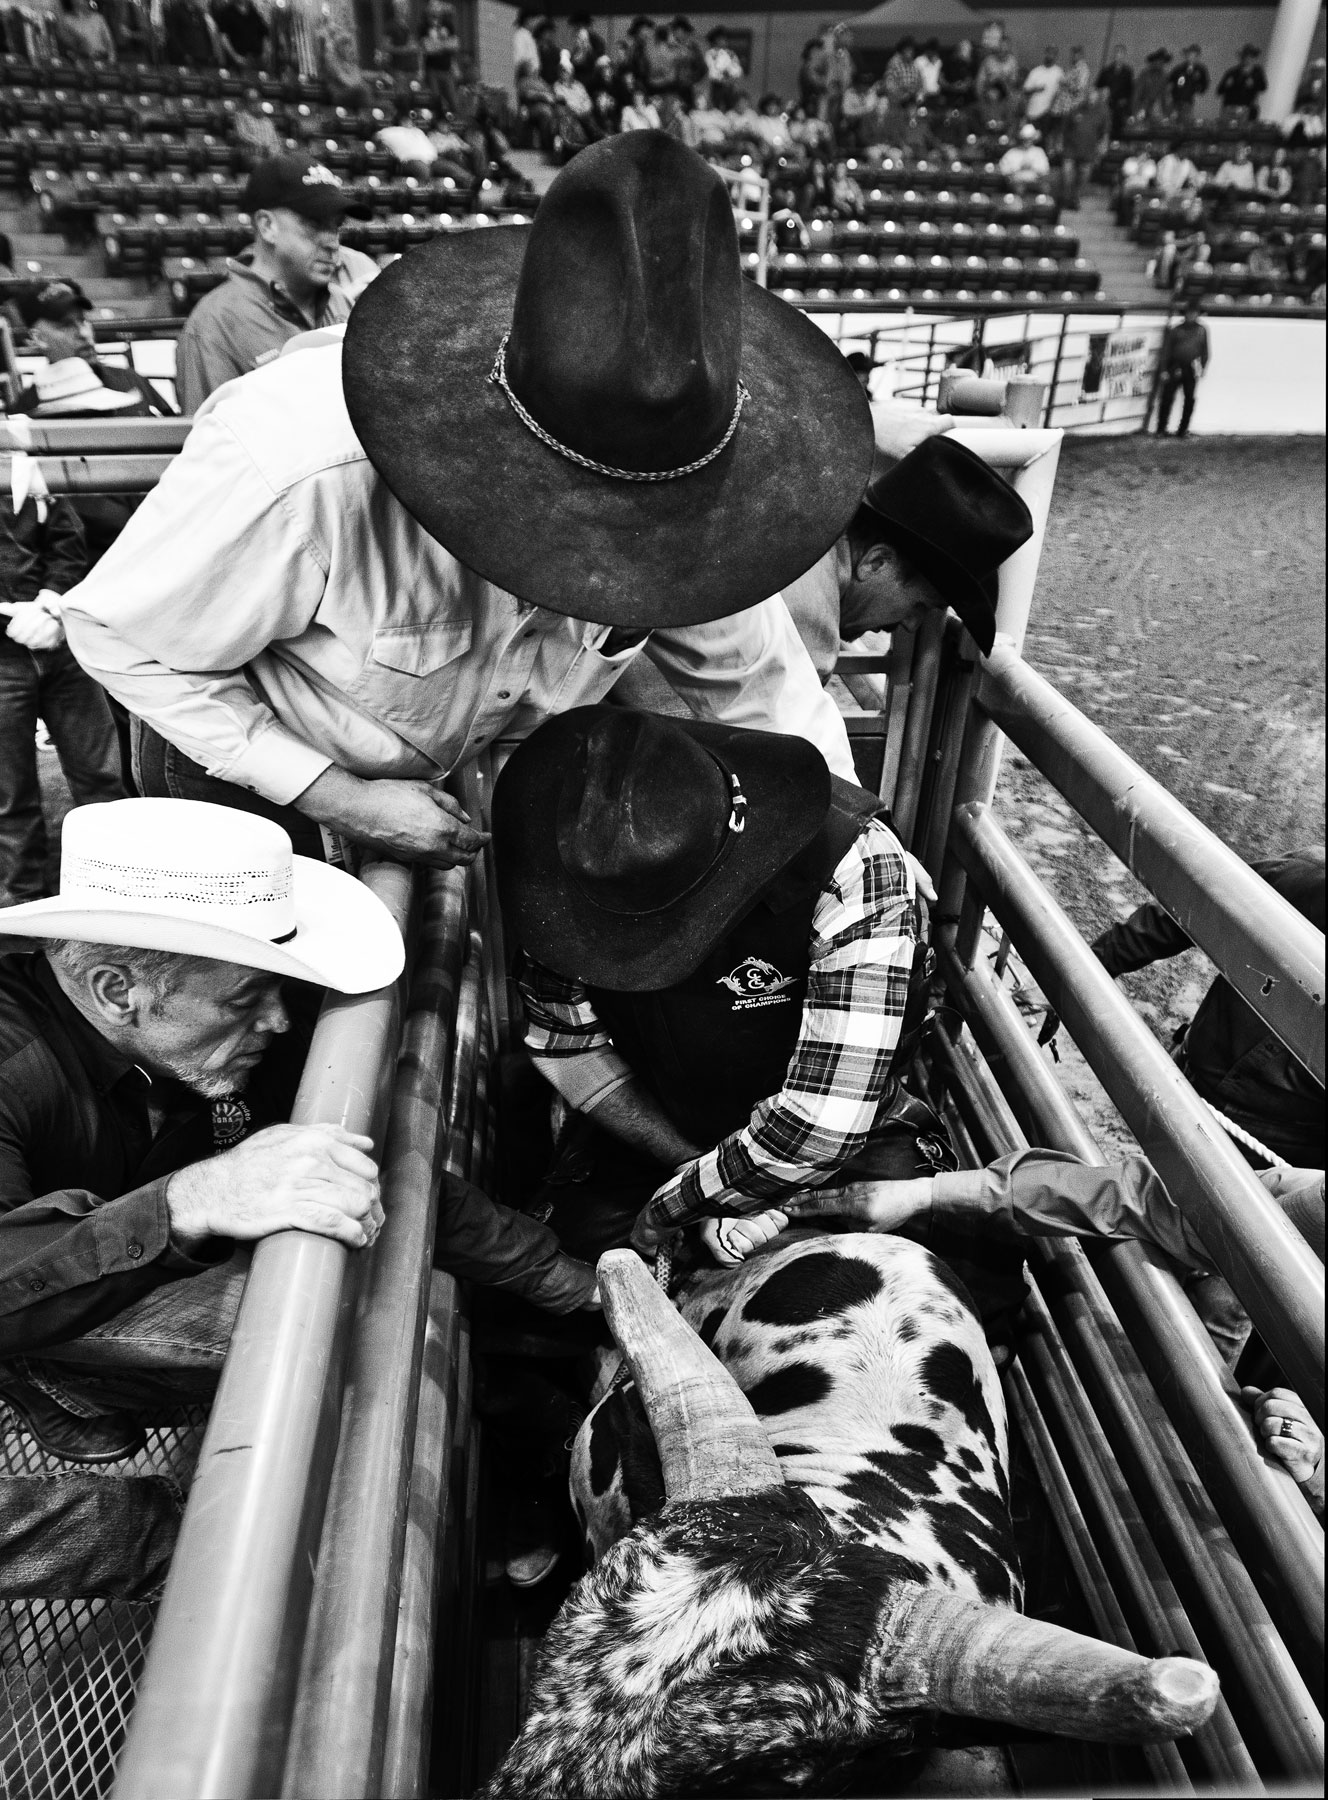 Entering the gates of the rodeo